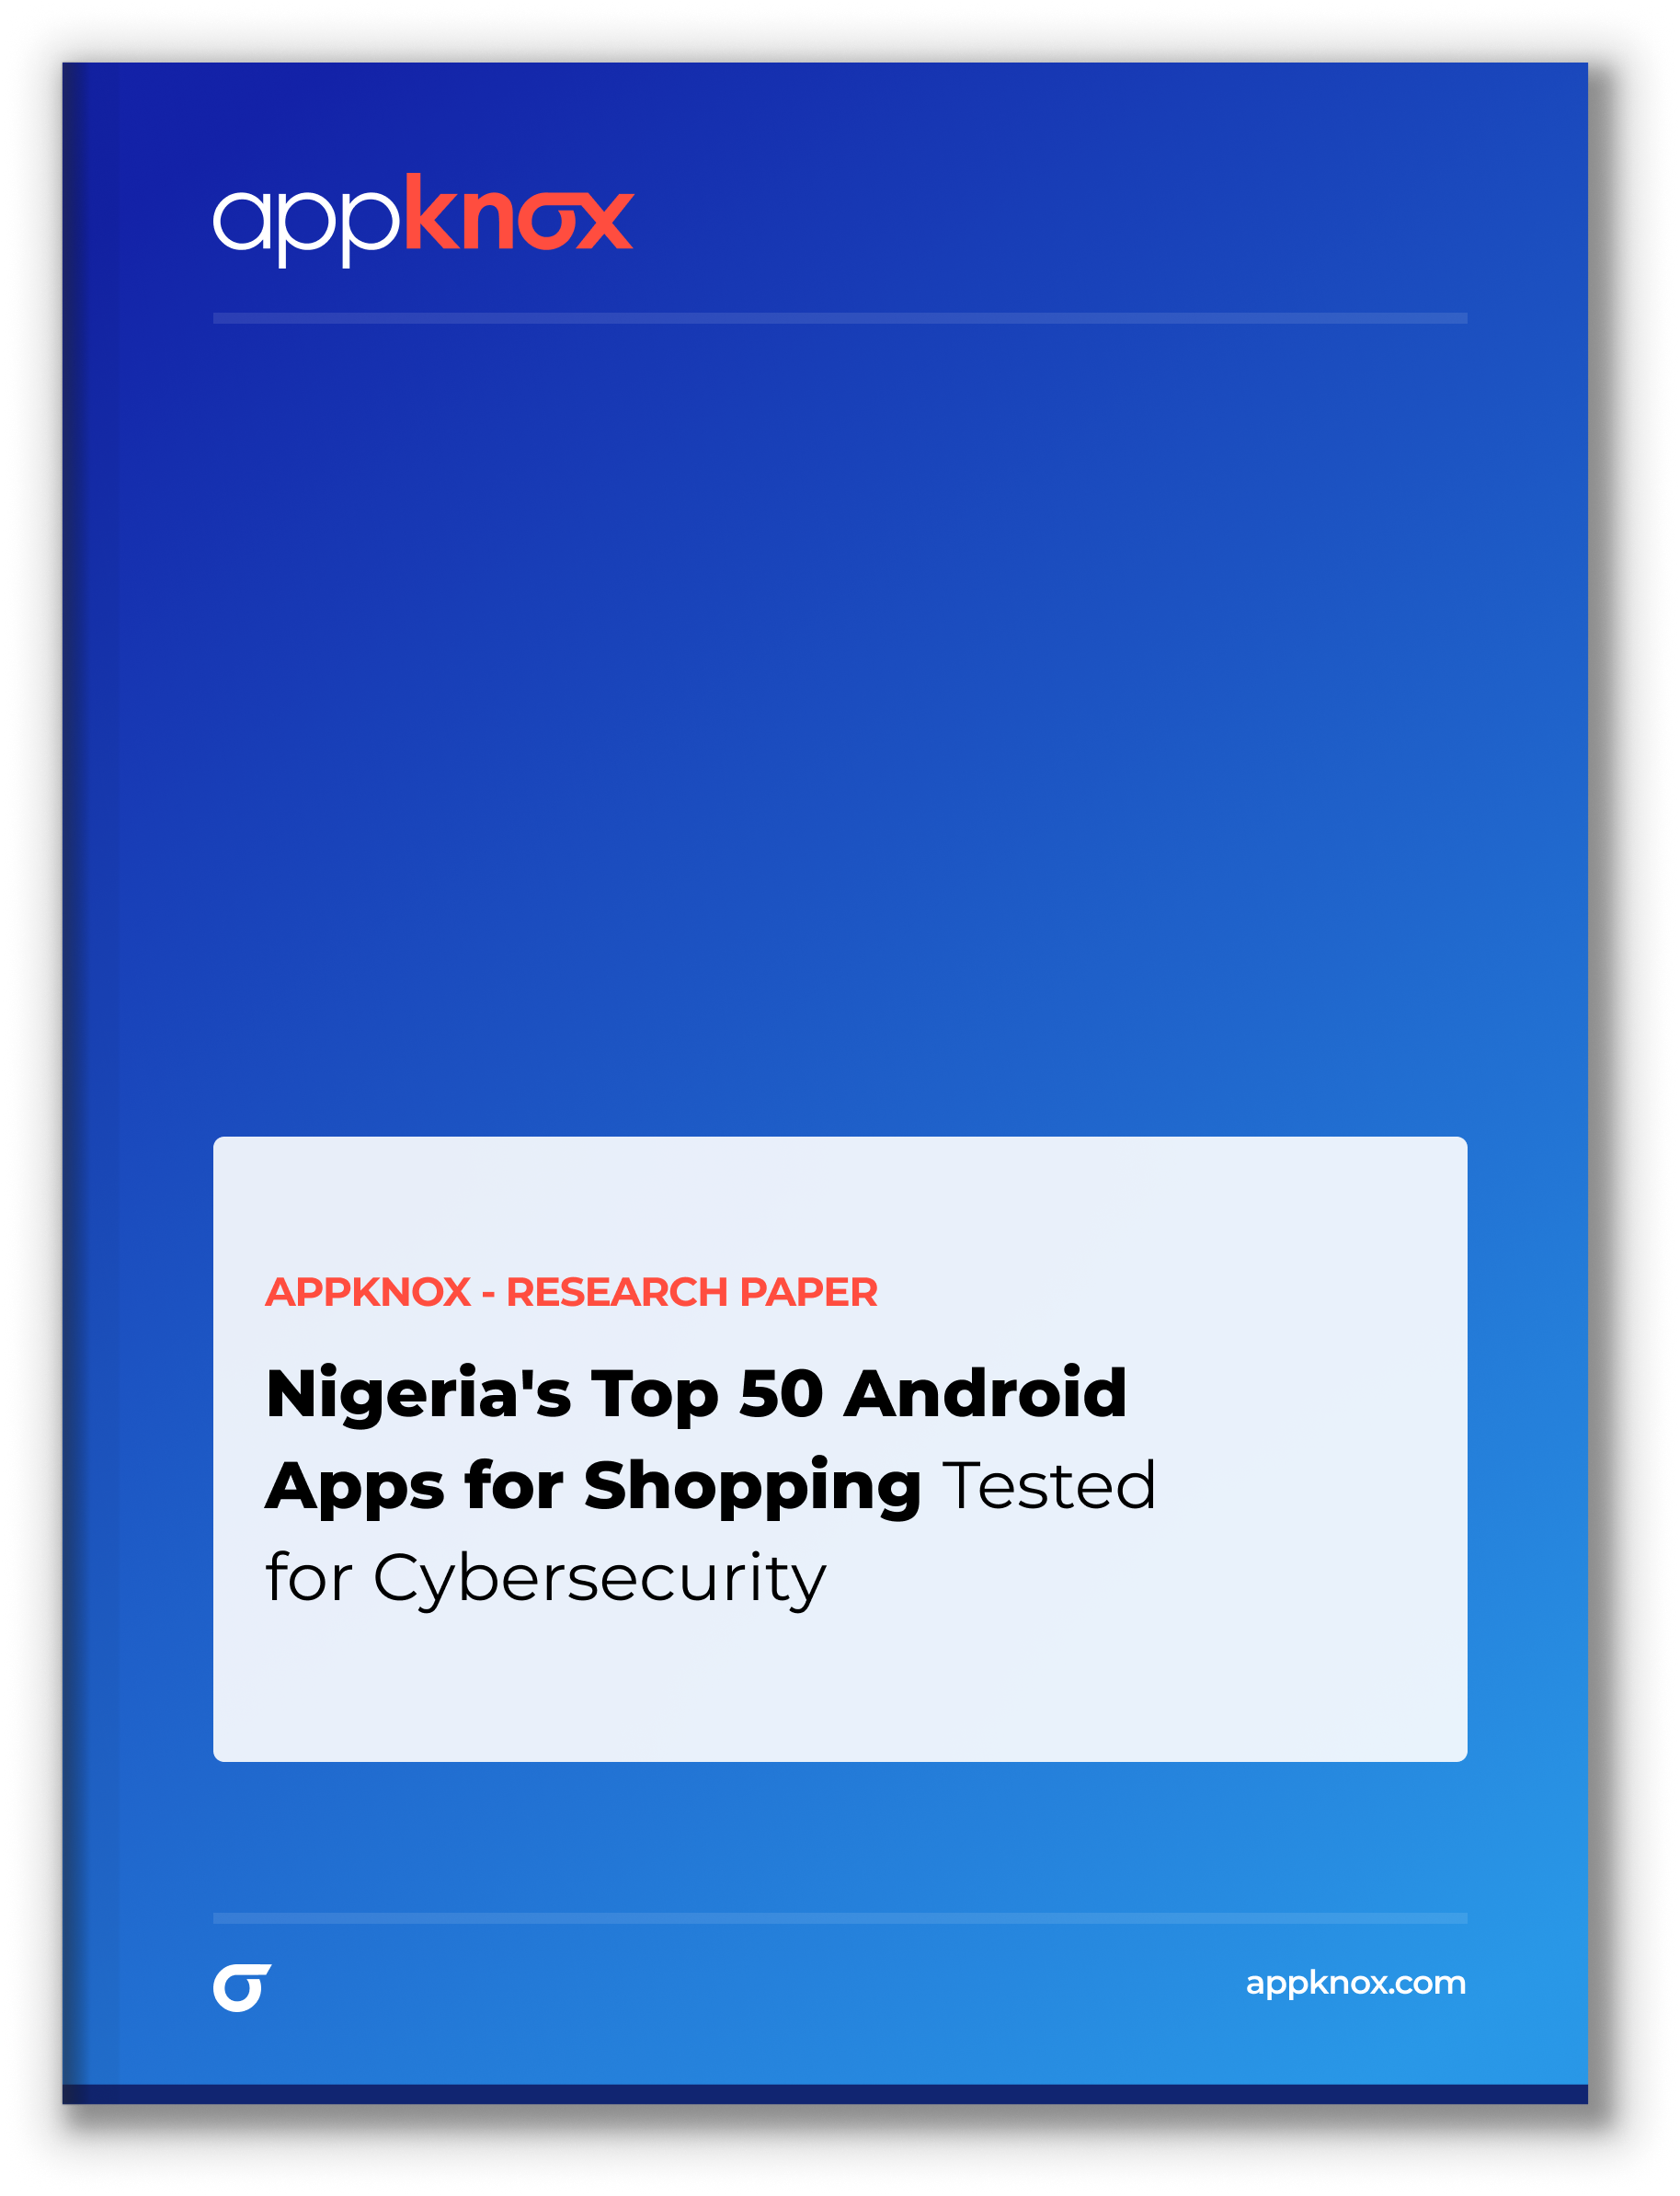 Nigerias Top 50 Android Apps for Finance Tested for Cybersecurity-1